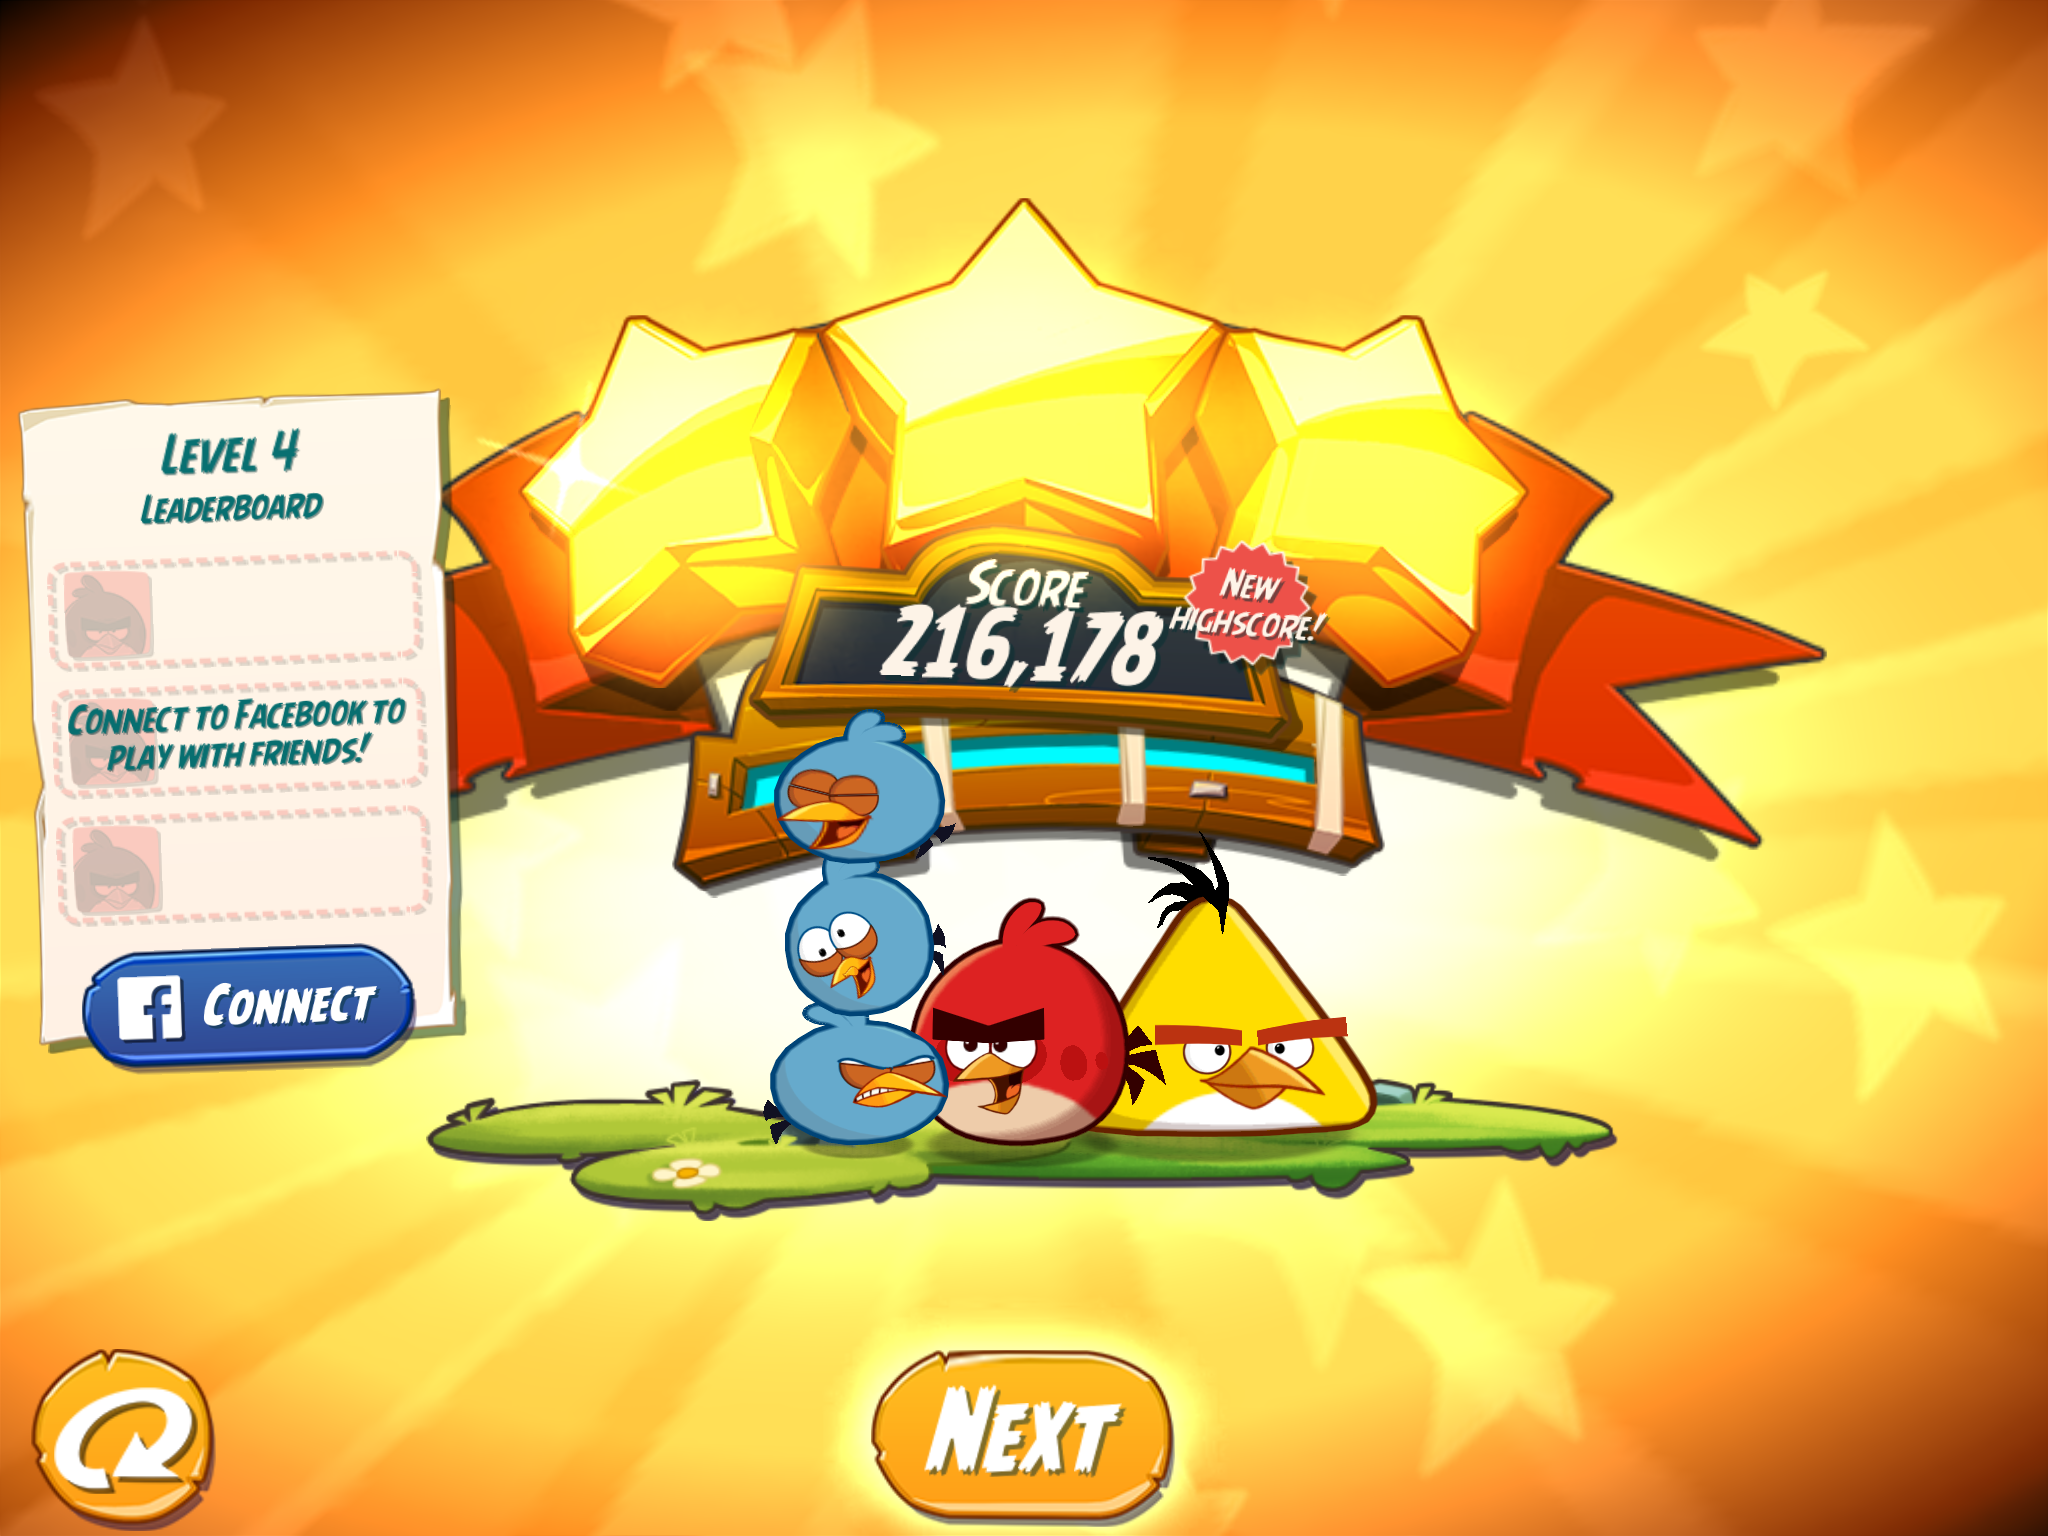 Angry Birds 2: Level 4 216,178 points